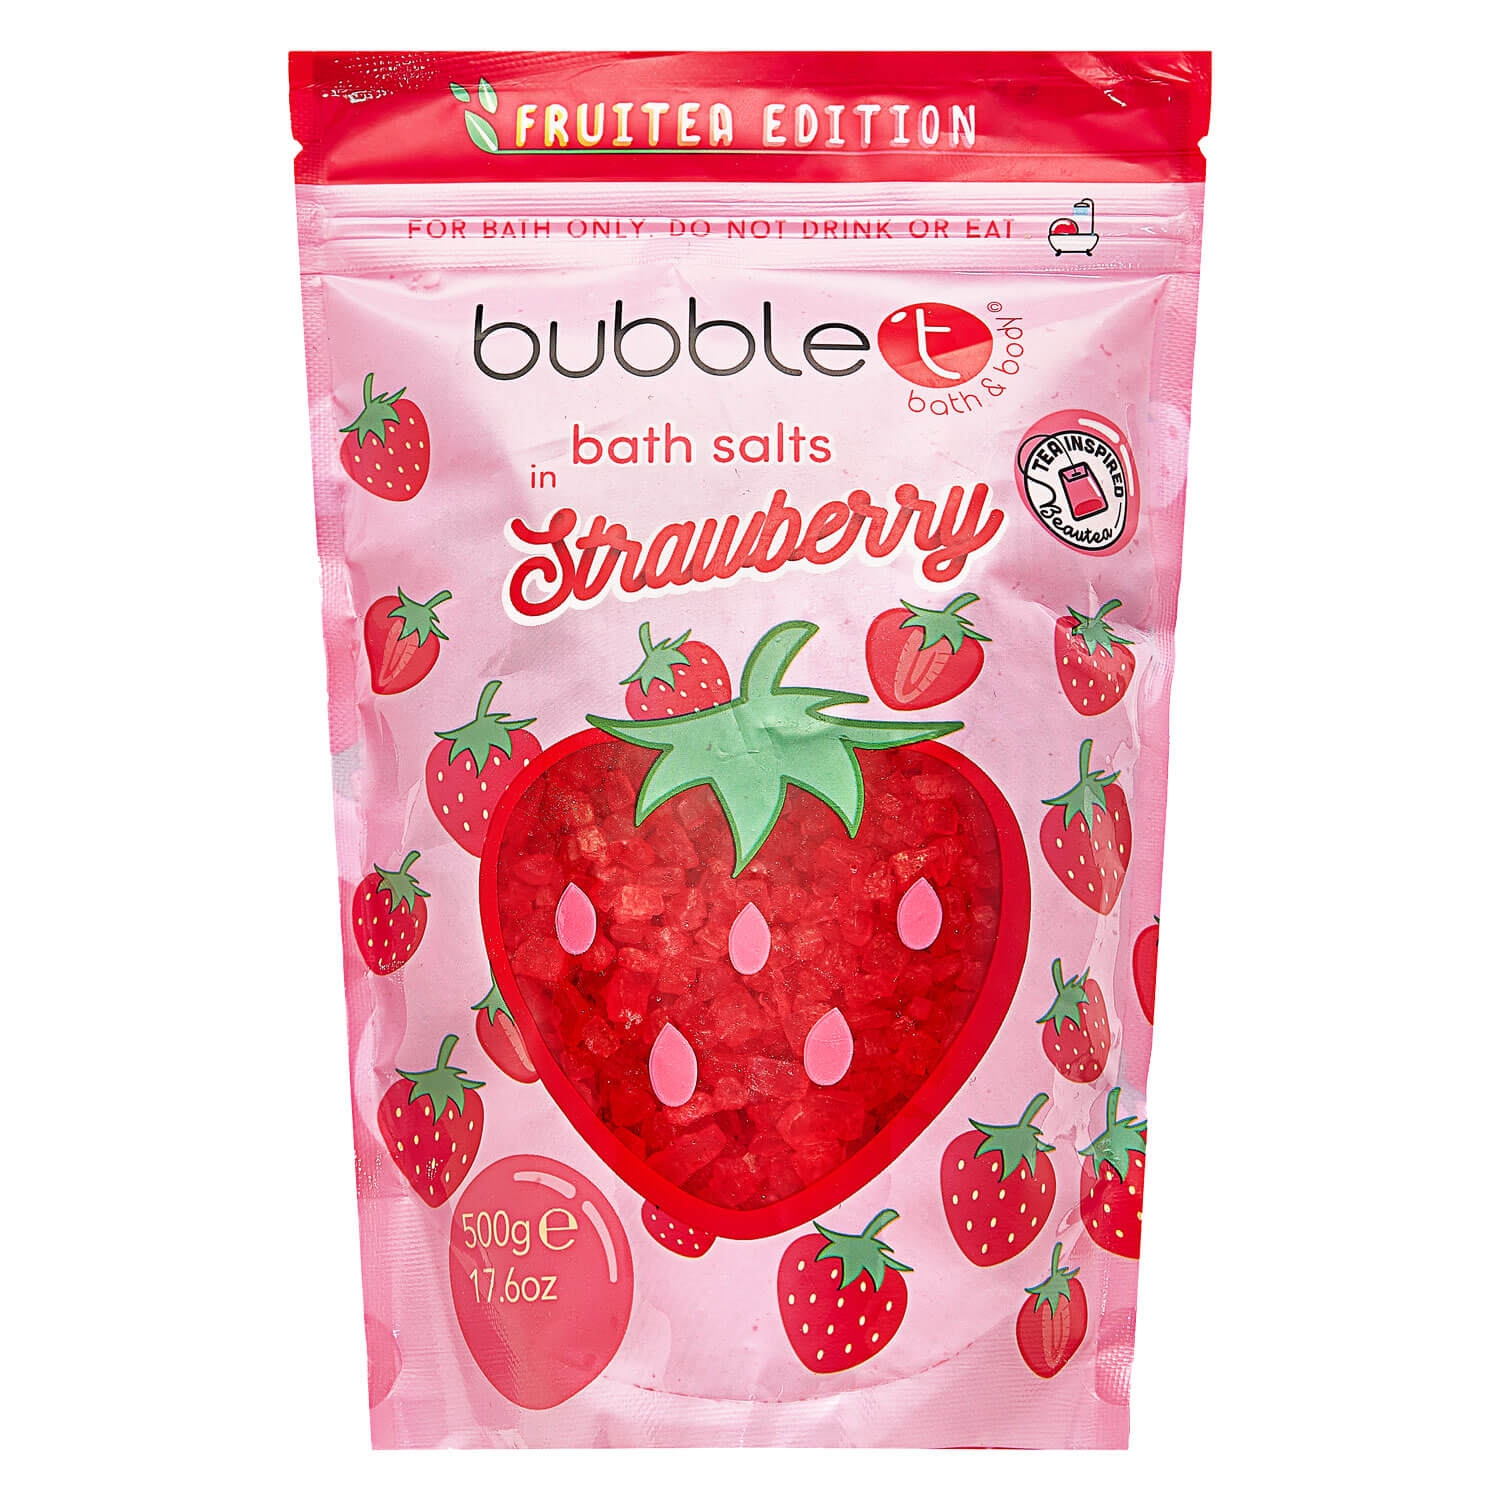 Product image from bubble t - Fruitea Bath Salts Strawberry